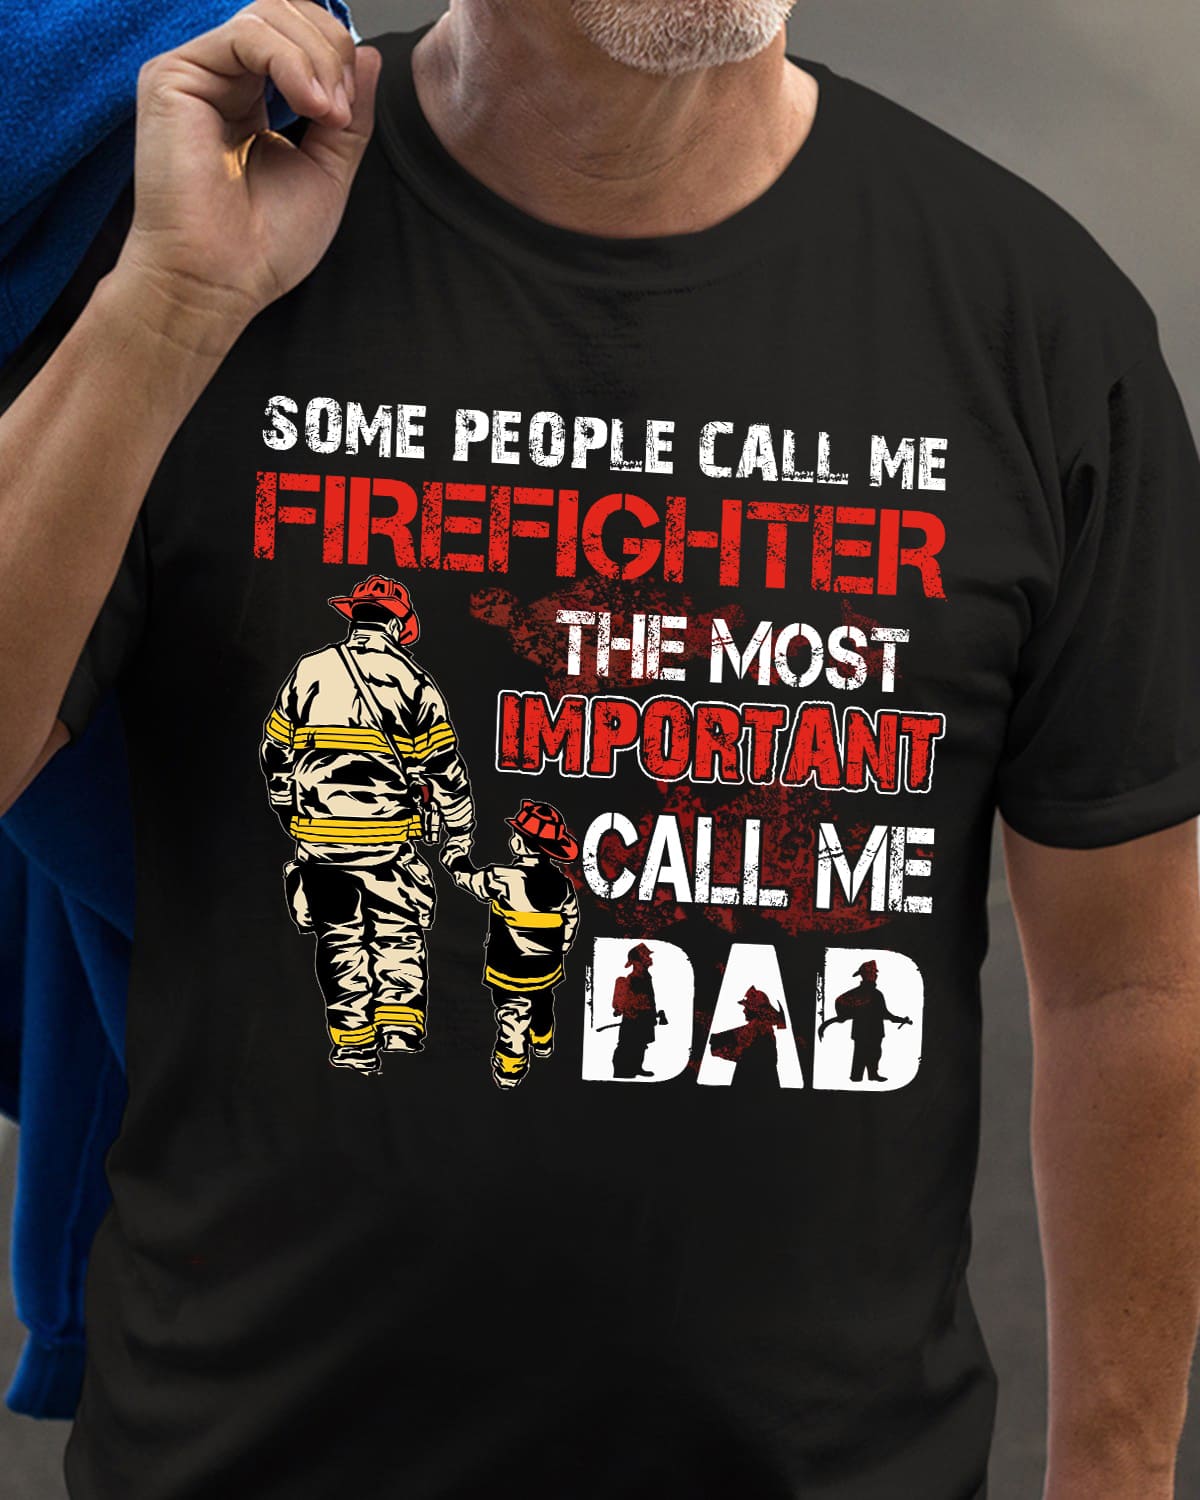 Some people call me firefighter, the most important call me dad - Firefighter dad, firefighter the lifesaver